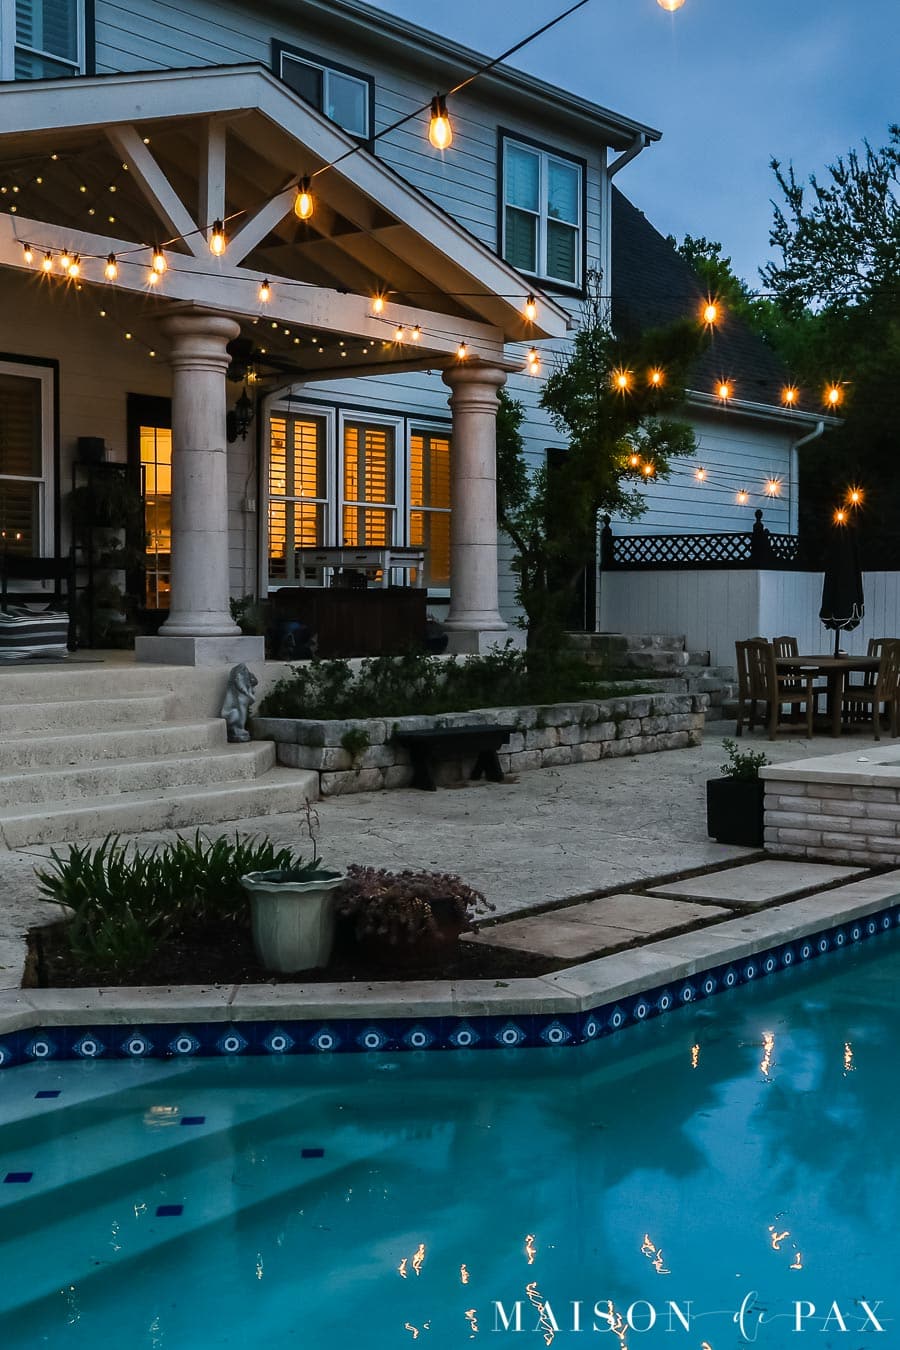 outdoor string lights hung over pool from porch